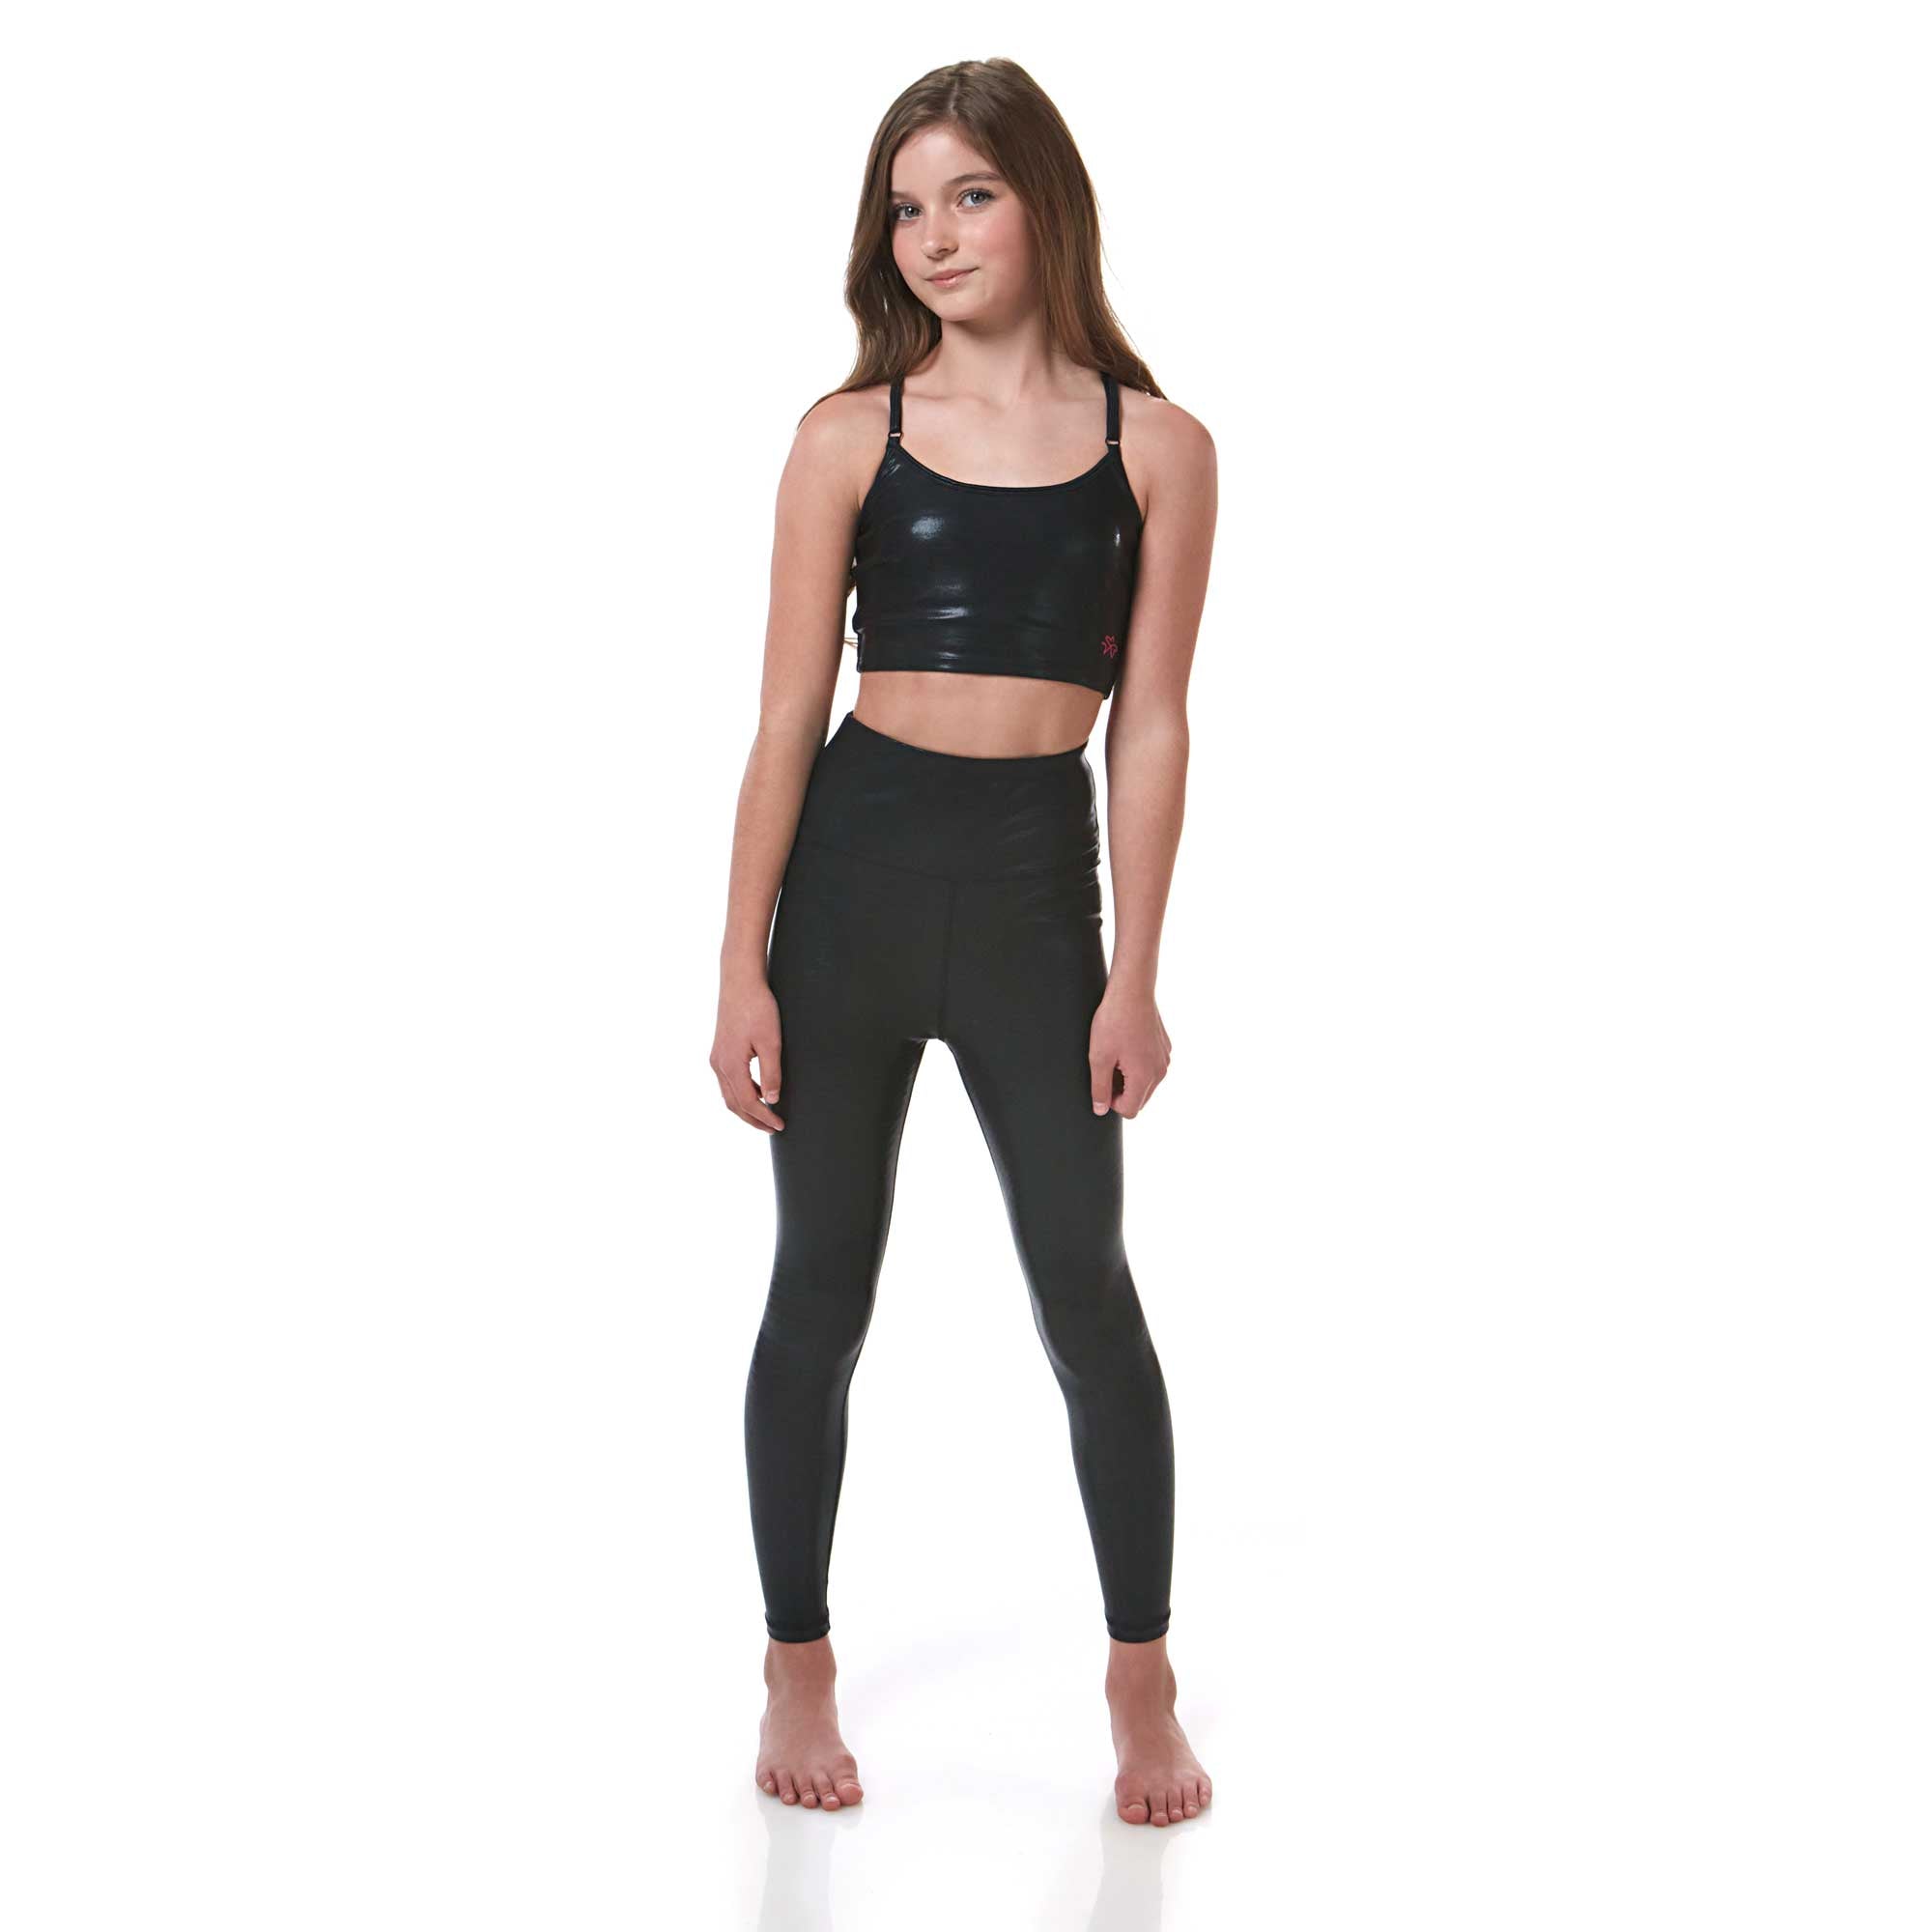 Buy STYLESO Yoga Pants for Women High Waisted Stretchable Workout